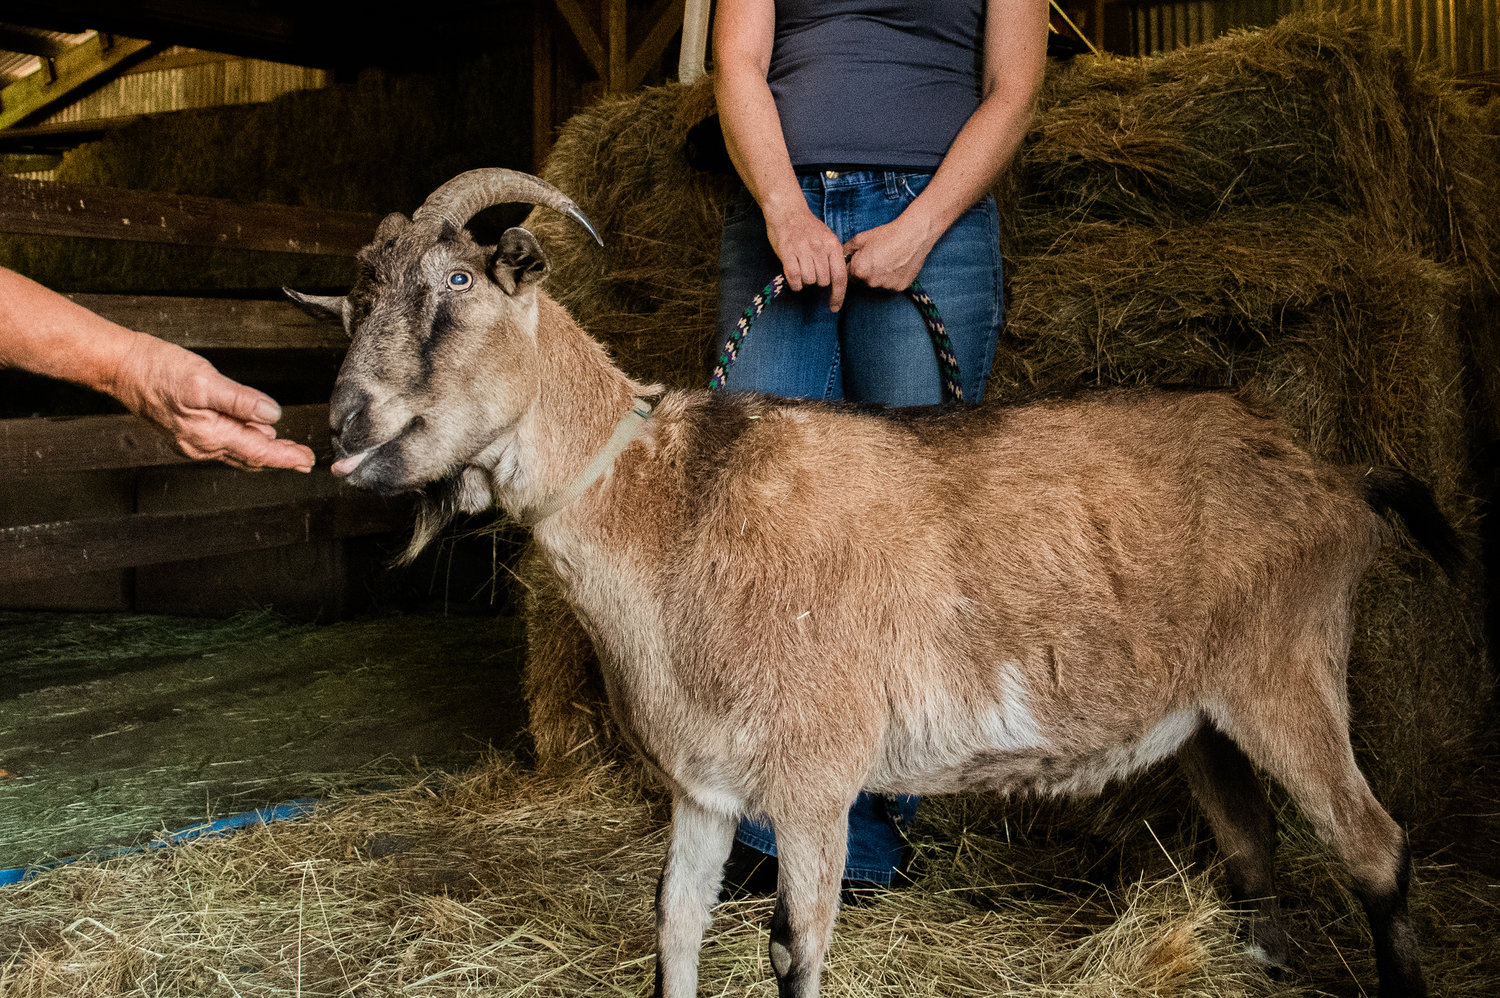 Chester, a Nigerian dwarf goat, sticks his tongue out while receiving attention Saturday afternoon in La Center.